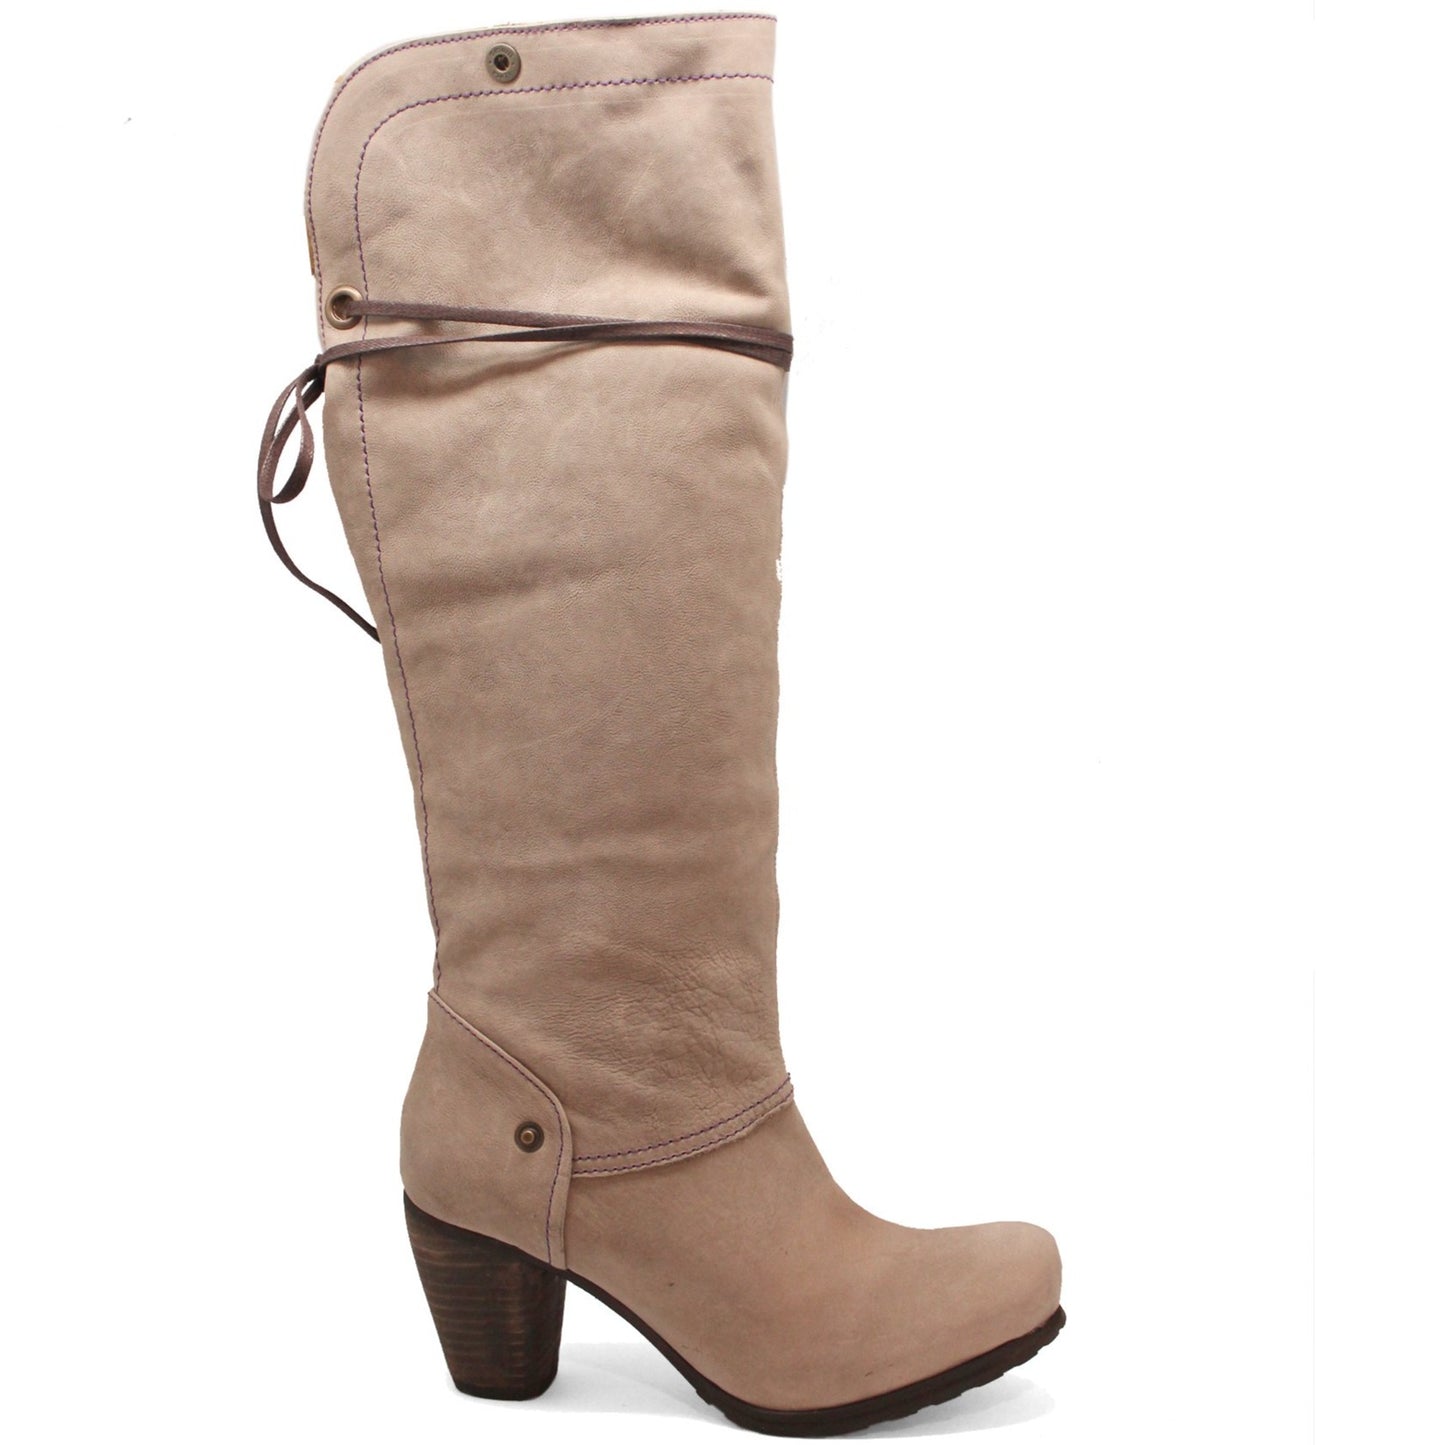 Pulpeux - Stone long leg boot- Last Pairs 36 and 38!